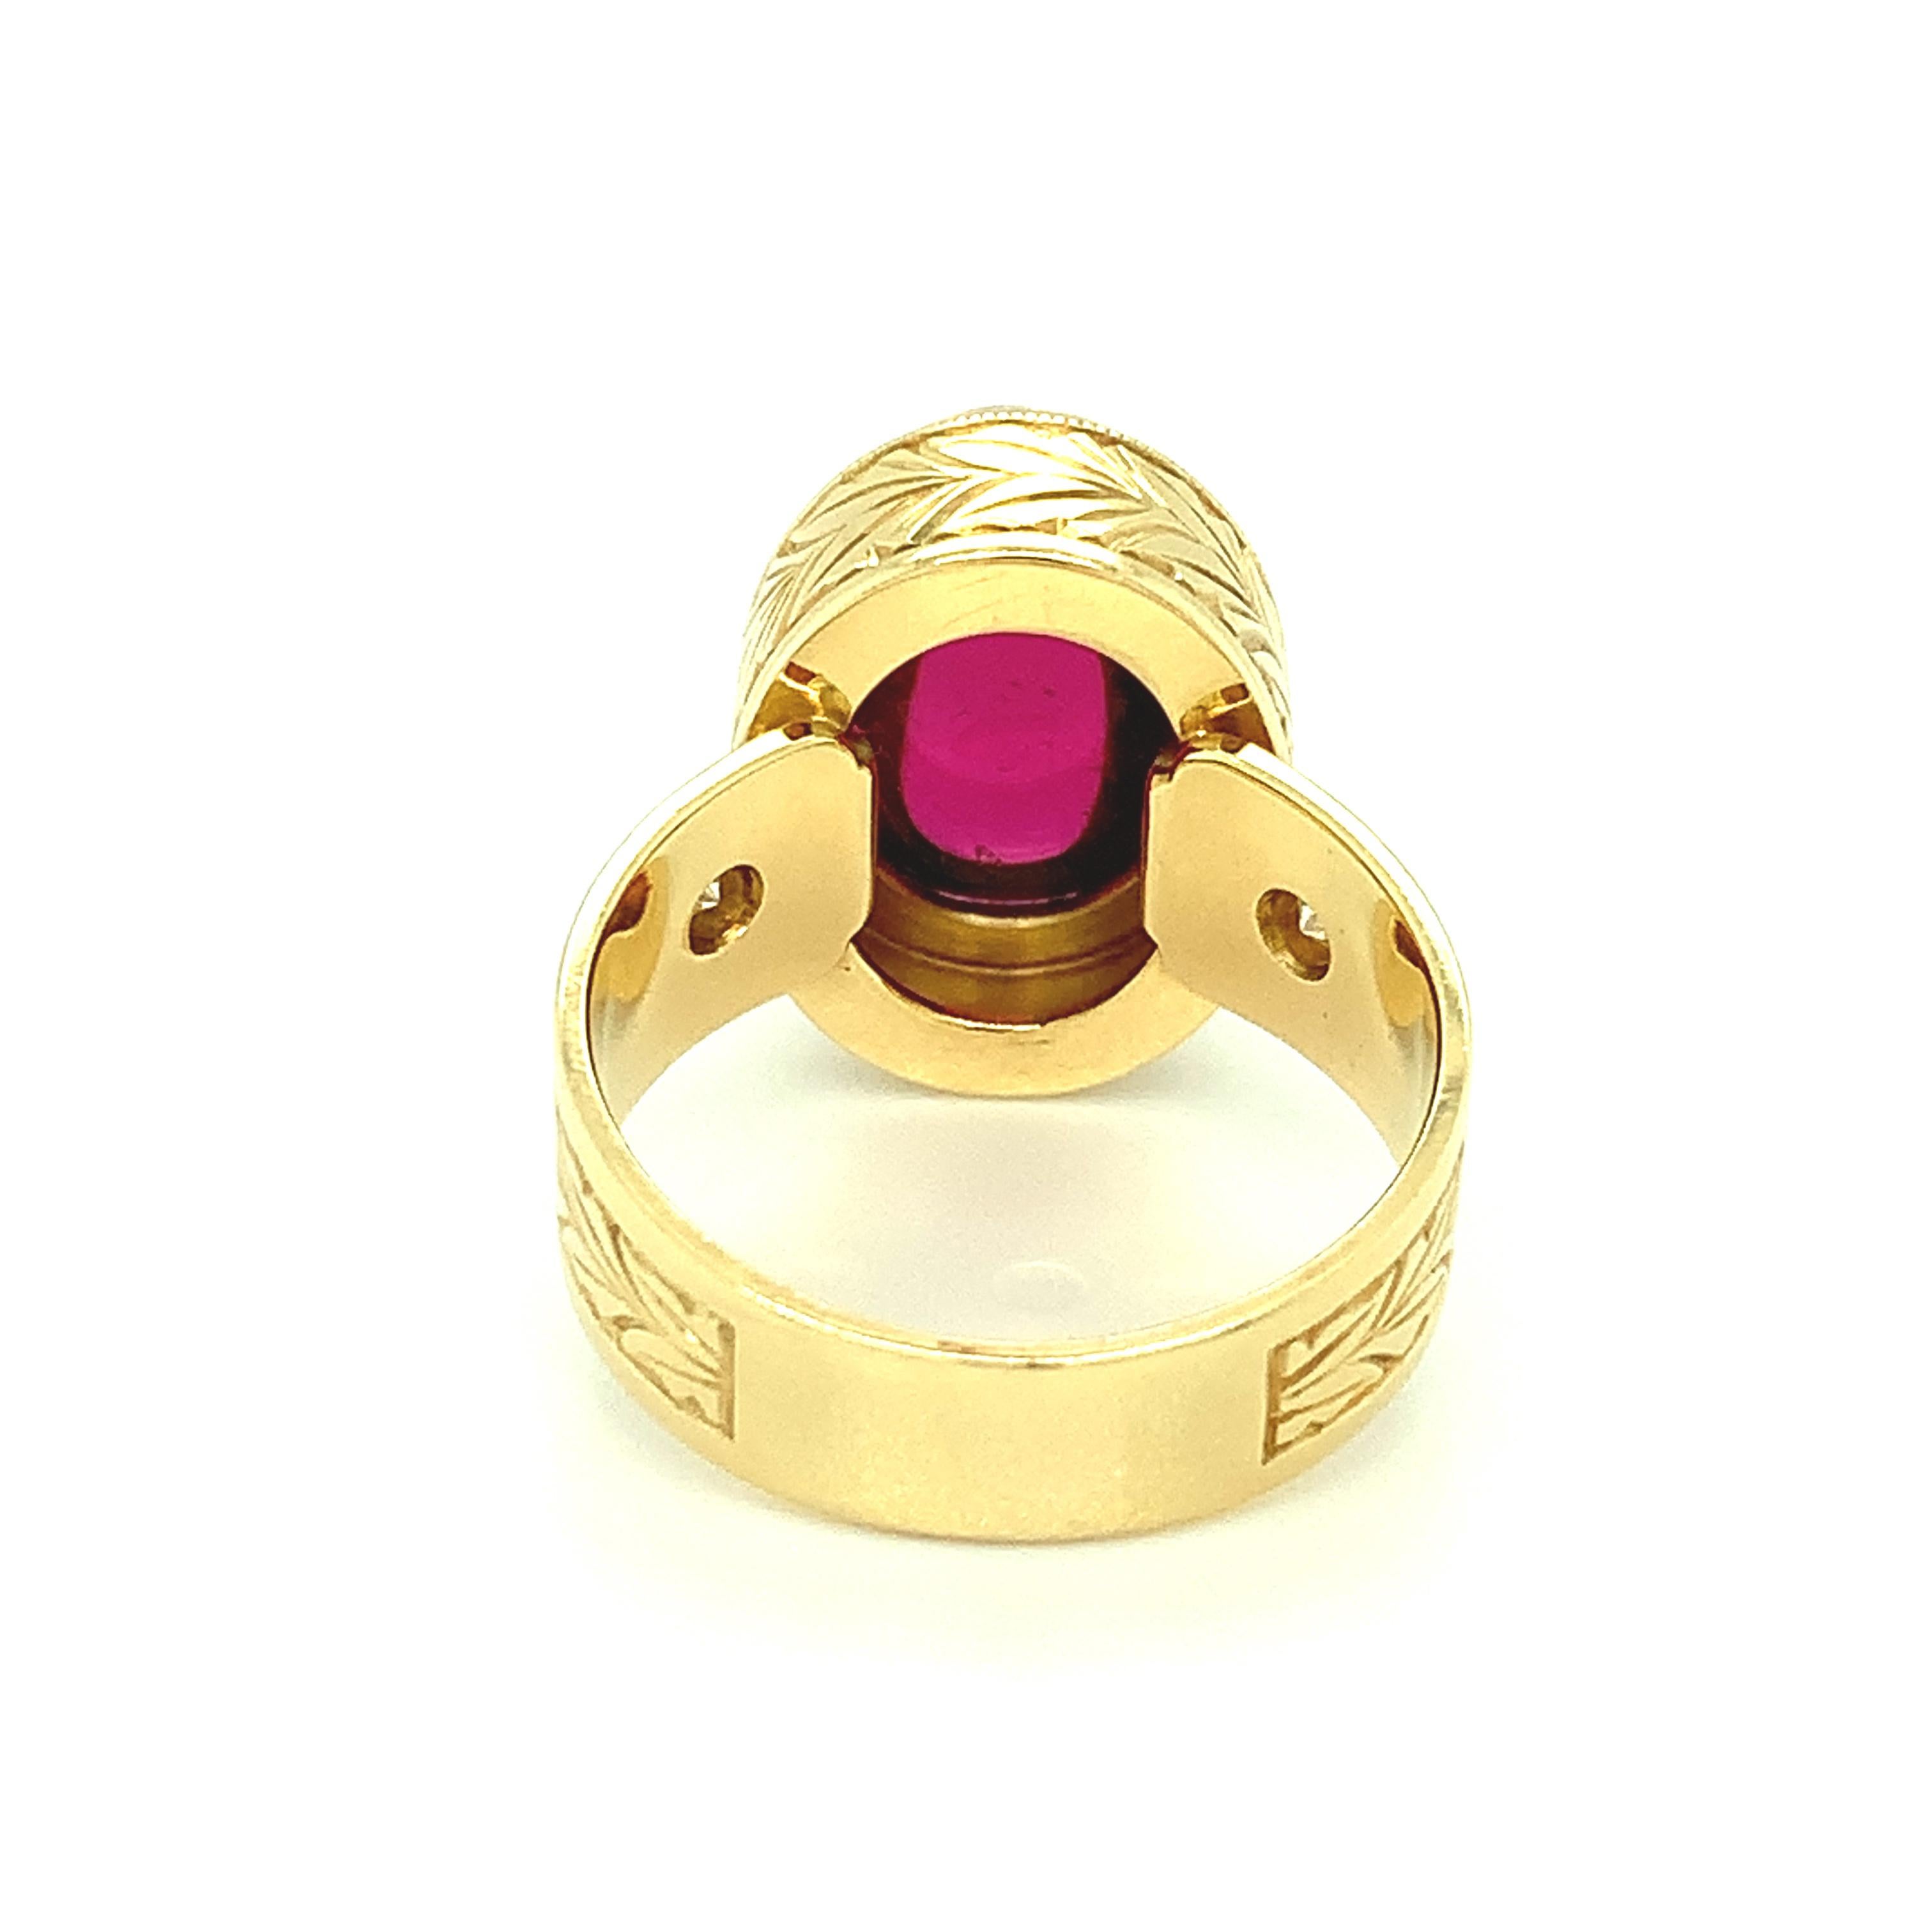 7.47 Carat Rubellite Tourmaline Cabochon and Diamond Band Ring in Yellow Gold For Sale 3